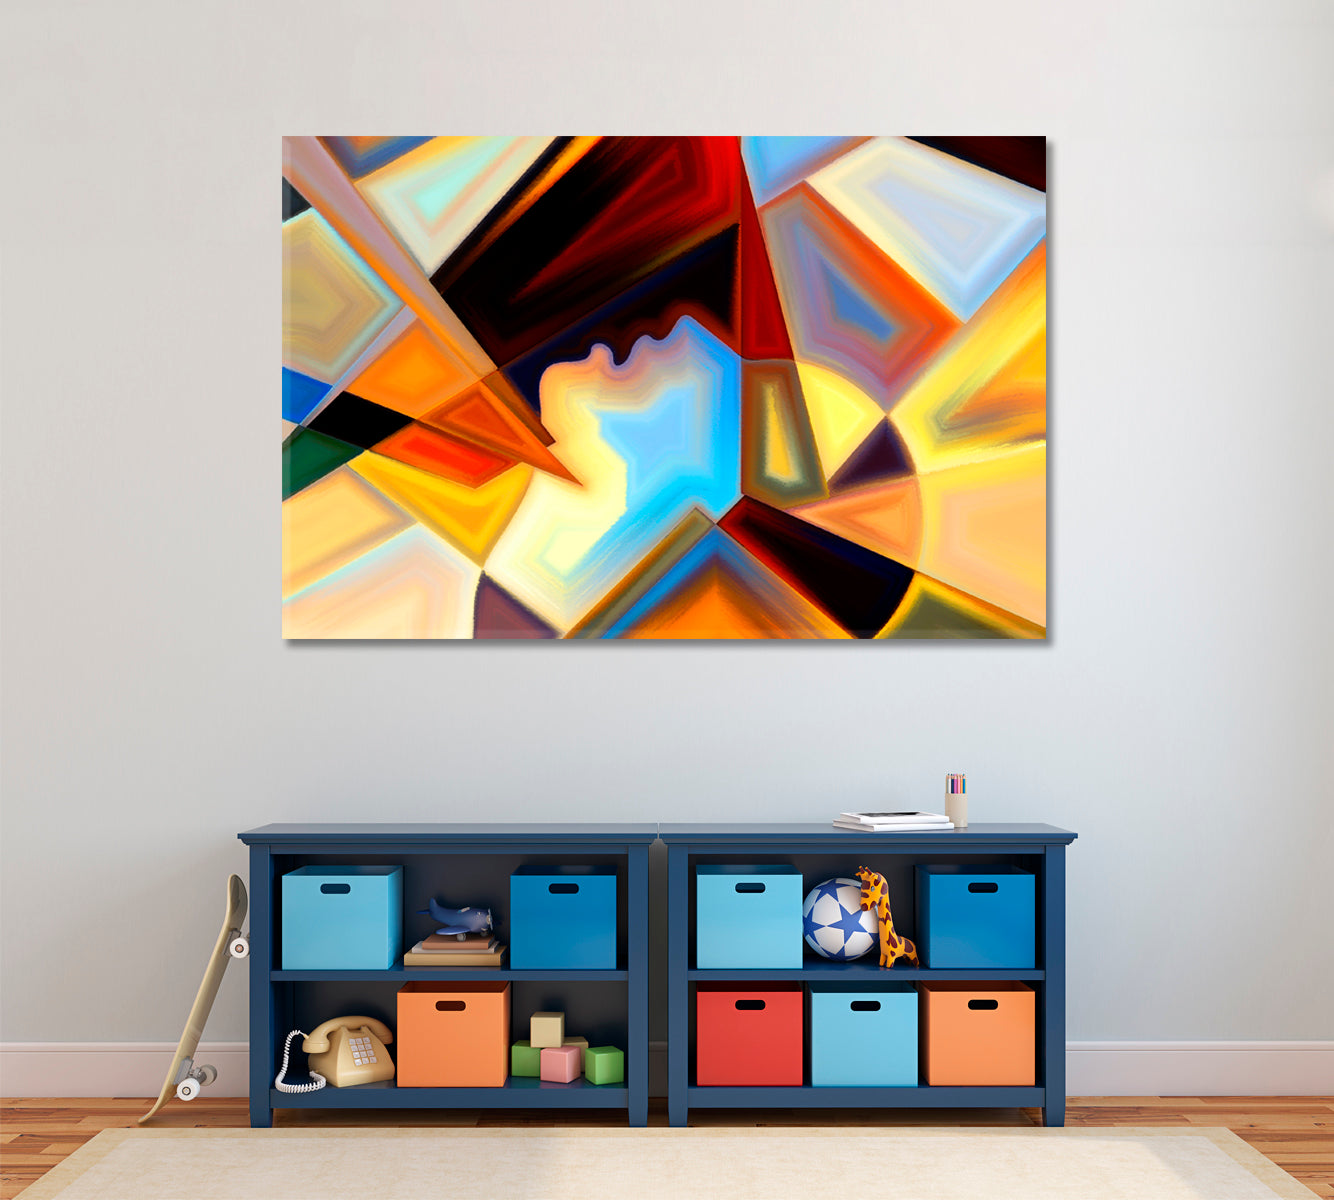 Divided Intellect Abstract Geometric Forms Design Abstract Art Print Artesty 1 panel 24" x 16" 